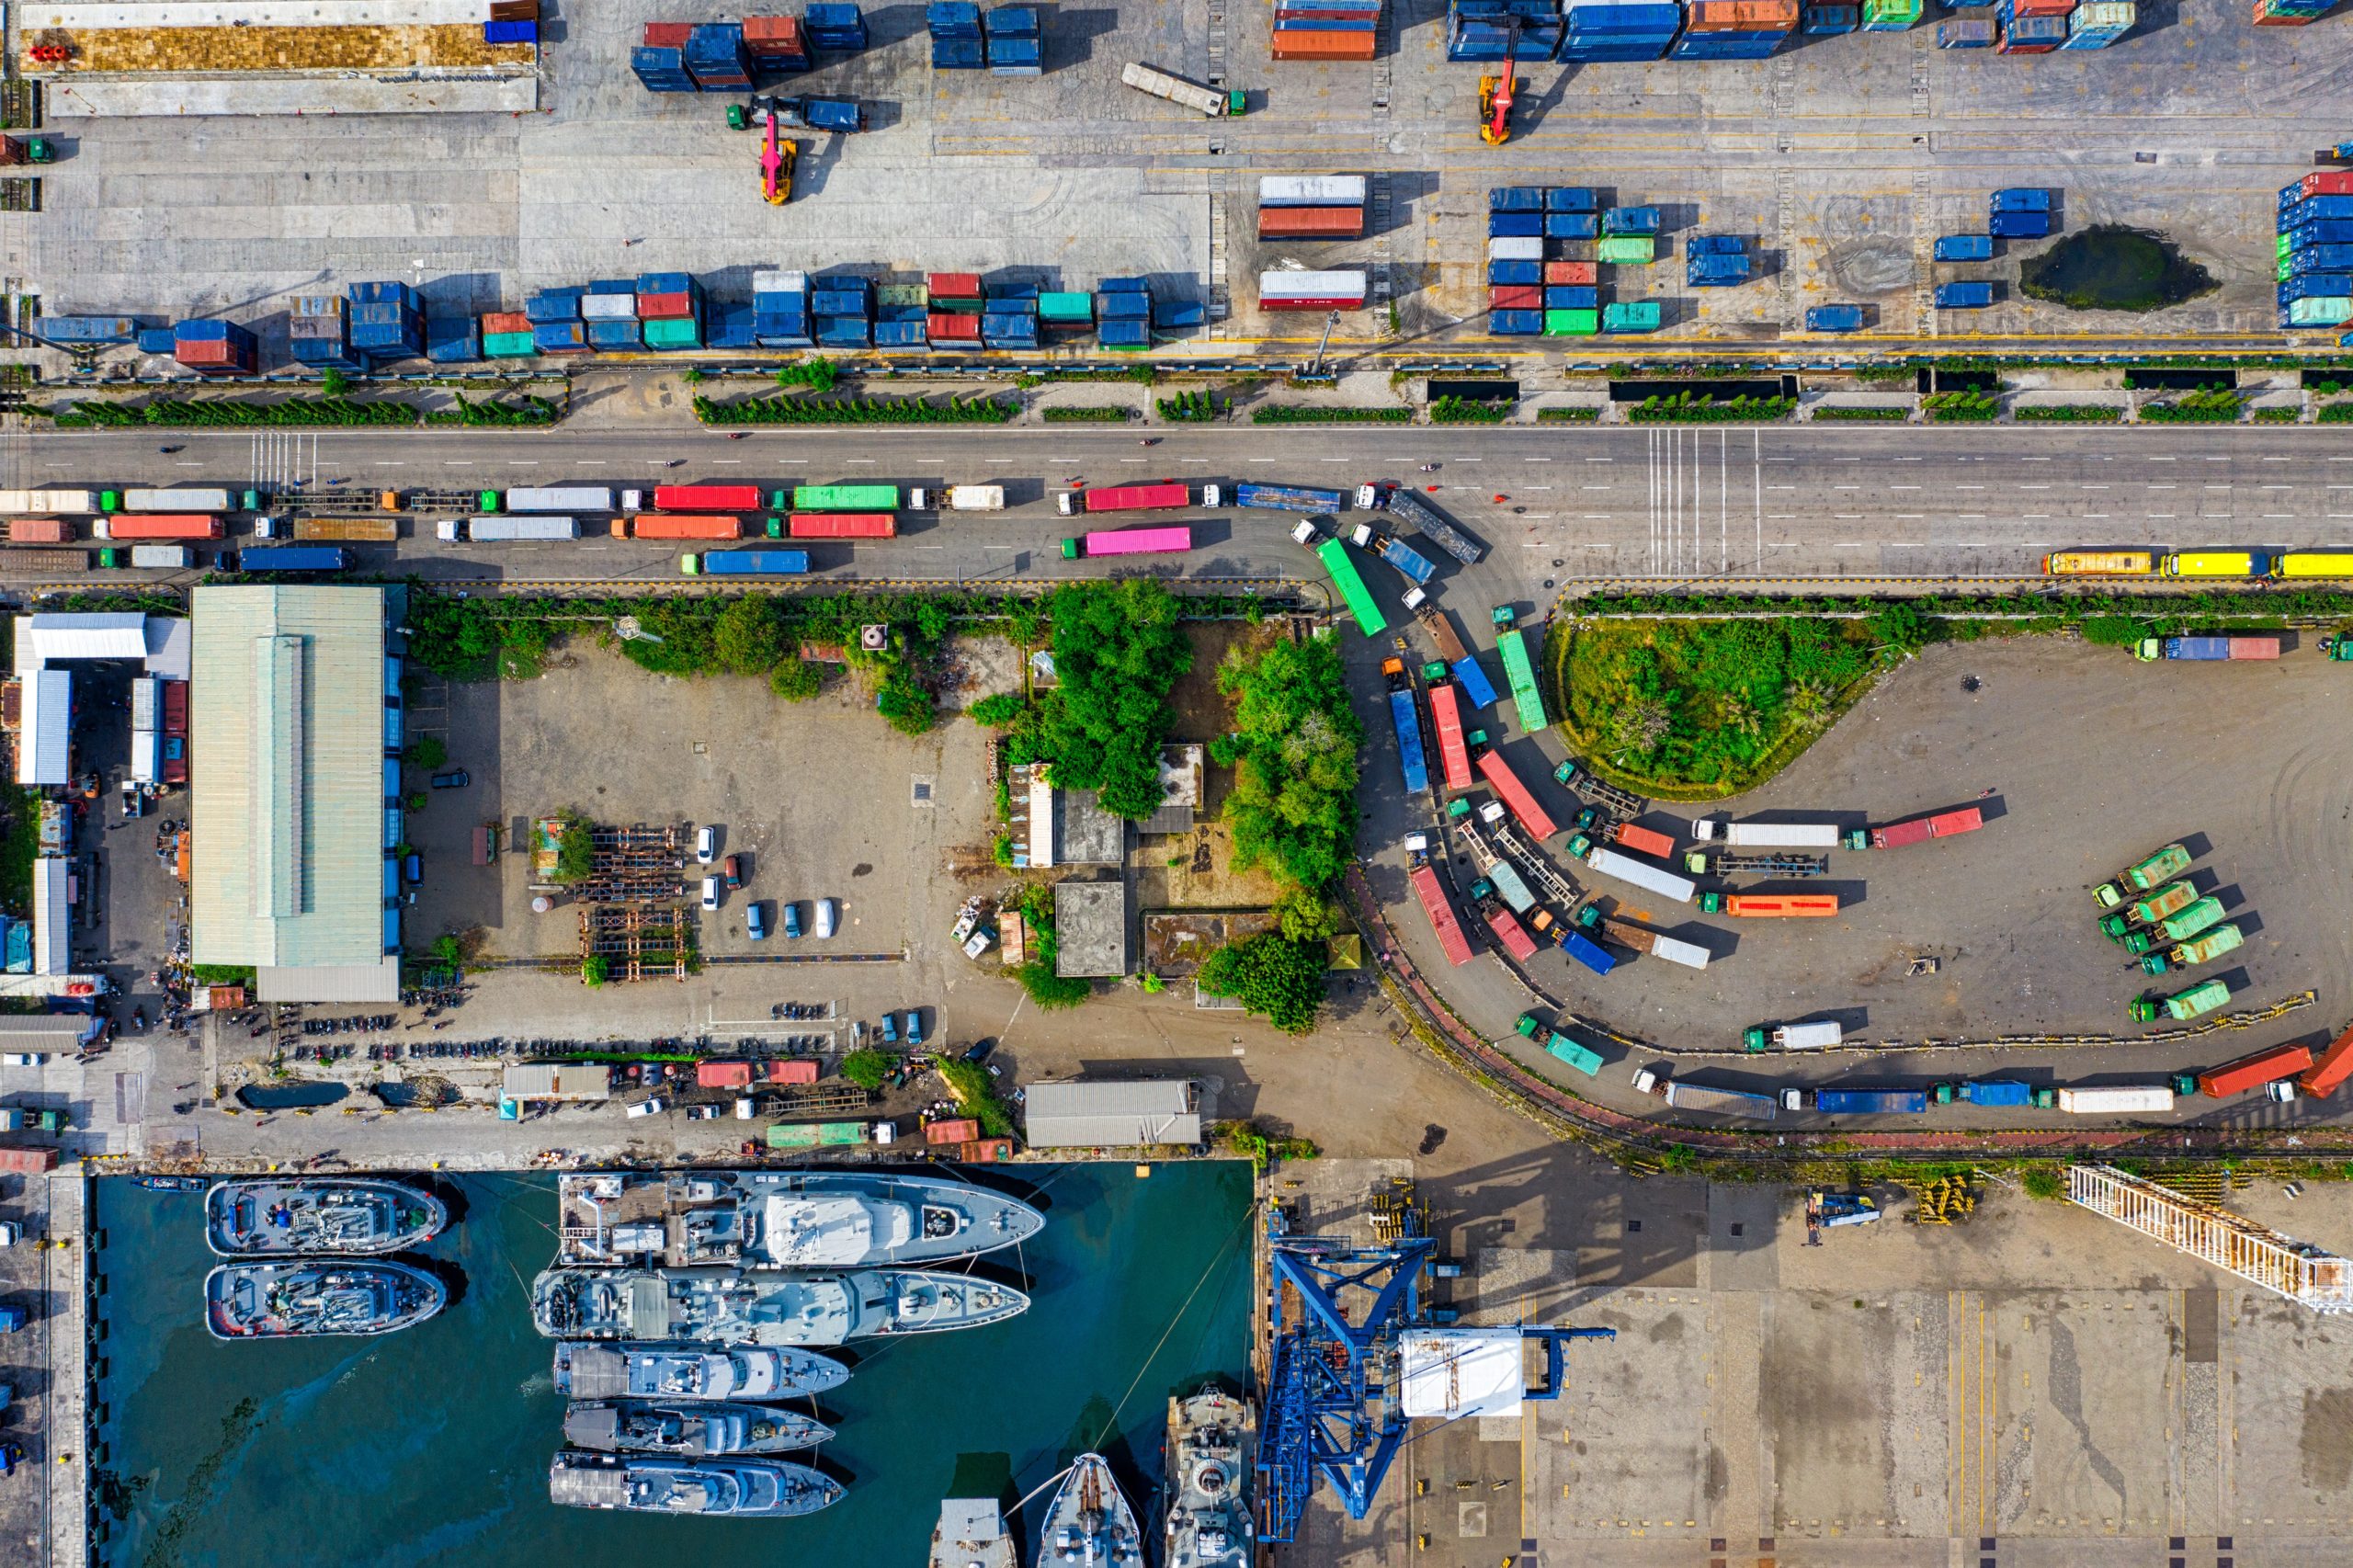 specialist freight harbour birds-eye view image